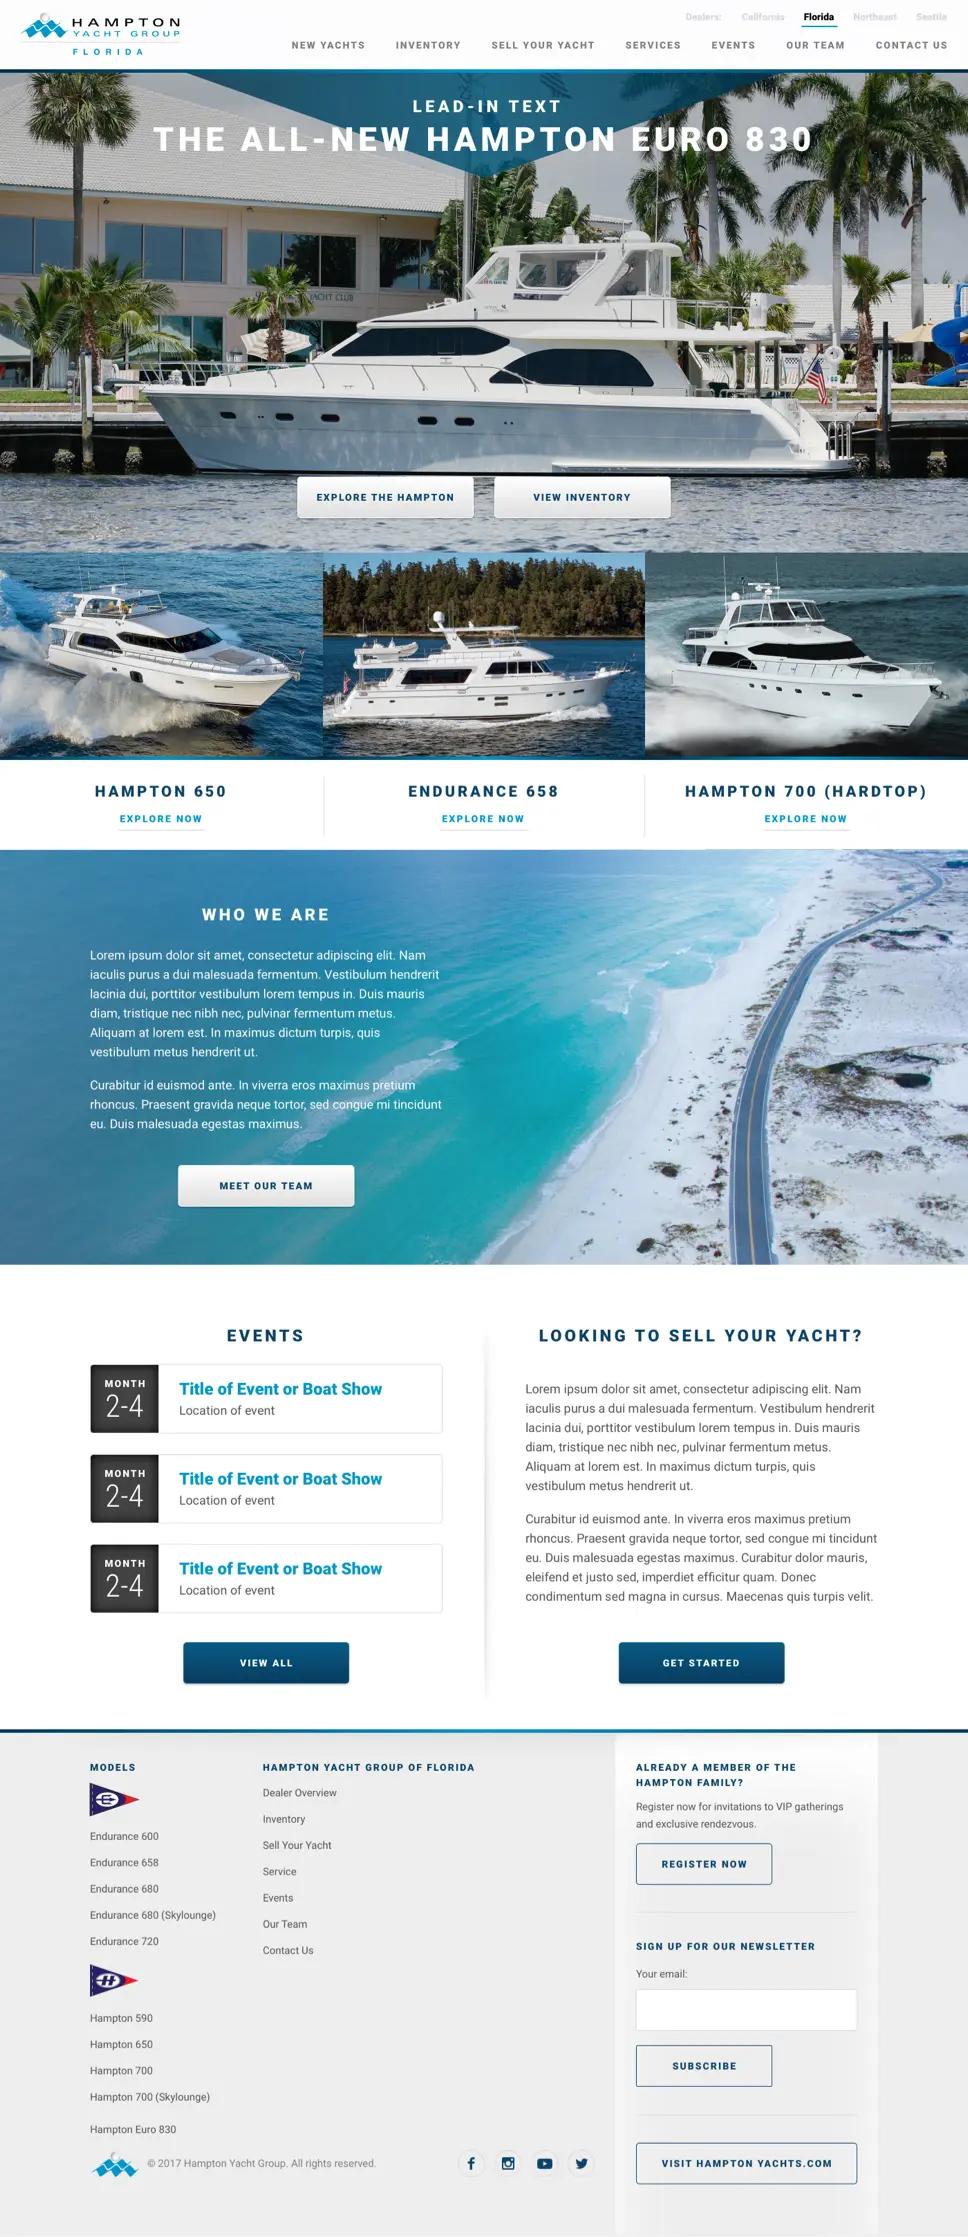 A screenshot of Hampton Yachts Group's dealer overview page.